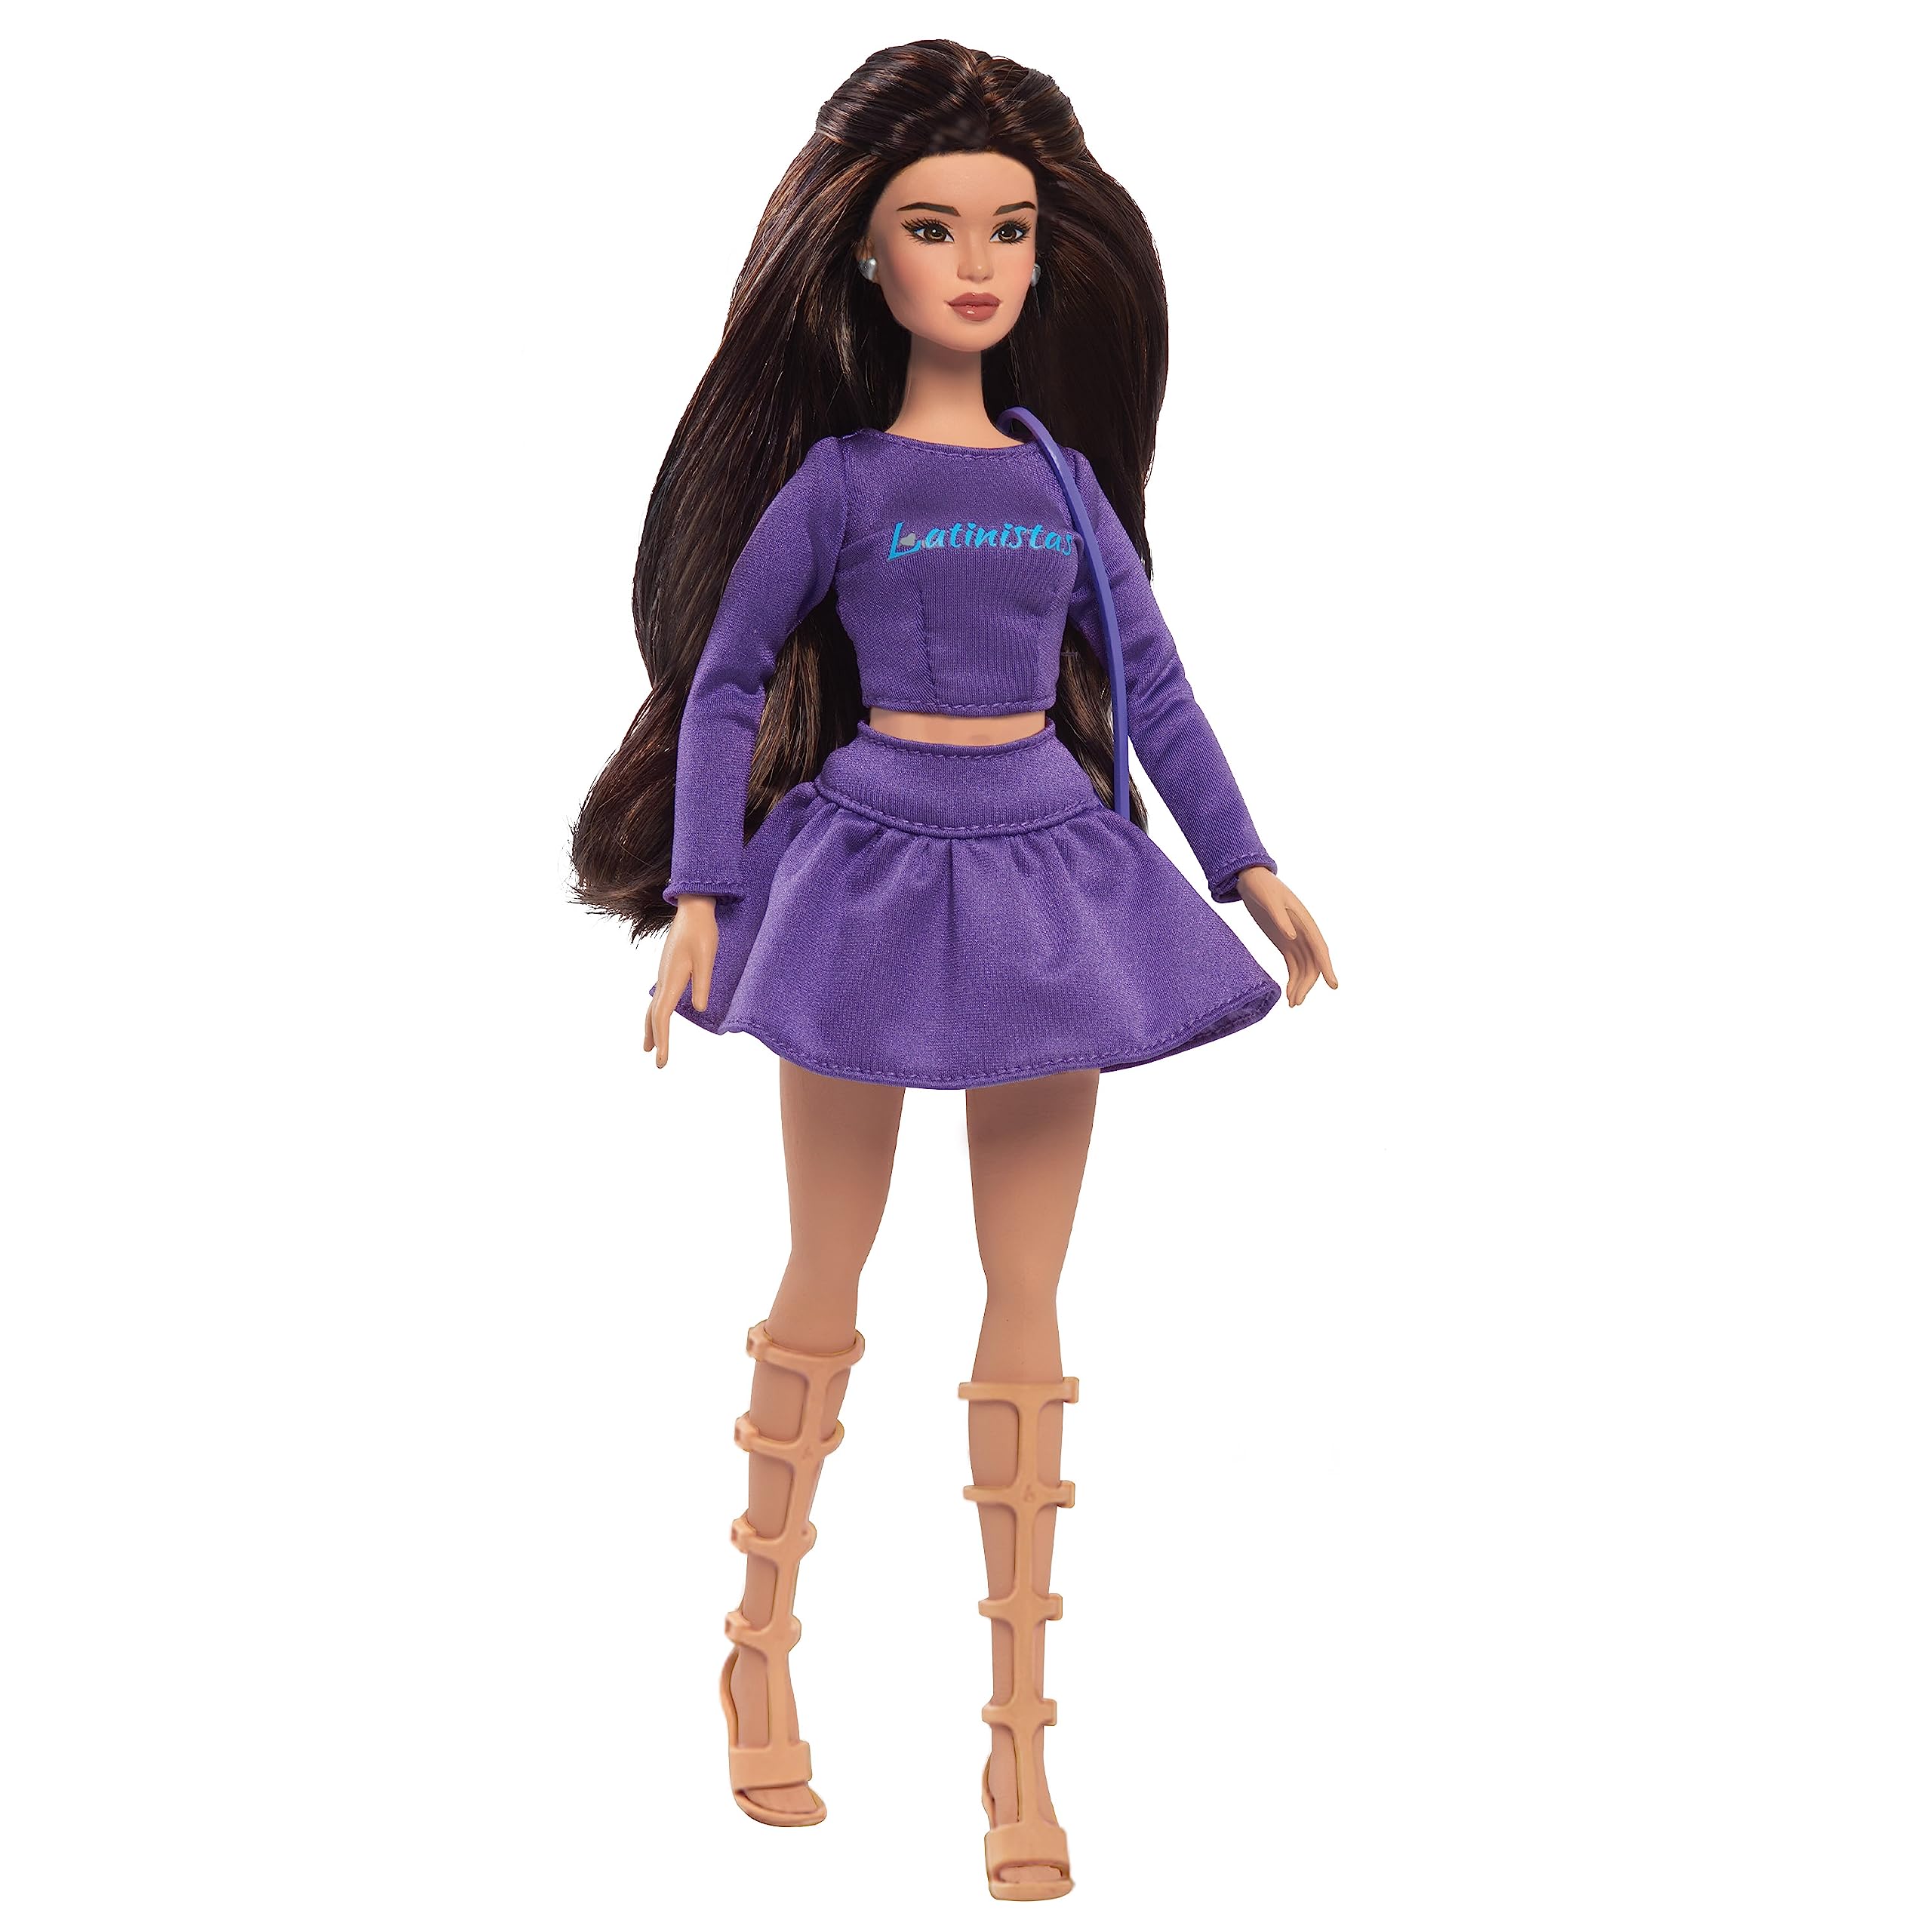 Purpose Toys The First All-Latina Line of Fashion Dolls, Latinistas 11.5-inch Dani Latina Fashion Doll and Accessories, Kids Toys for Ages 3 Up, Designed and Developed Latin